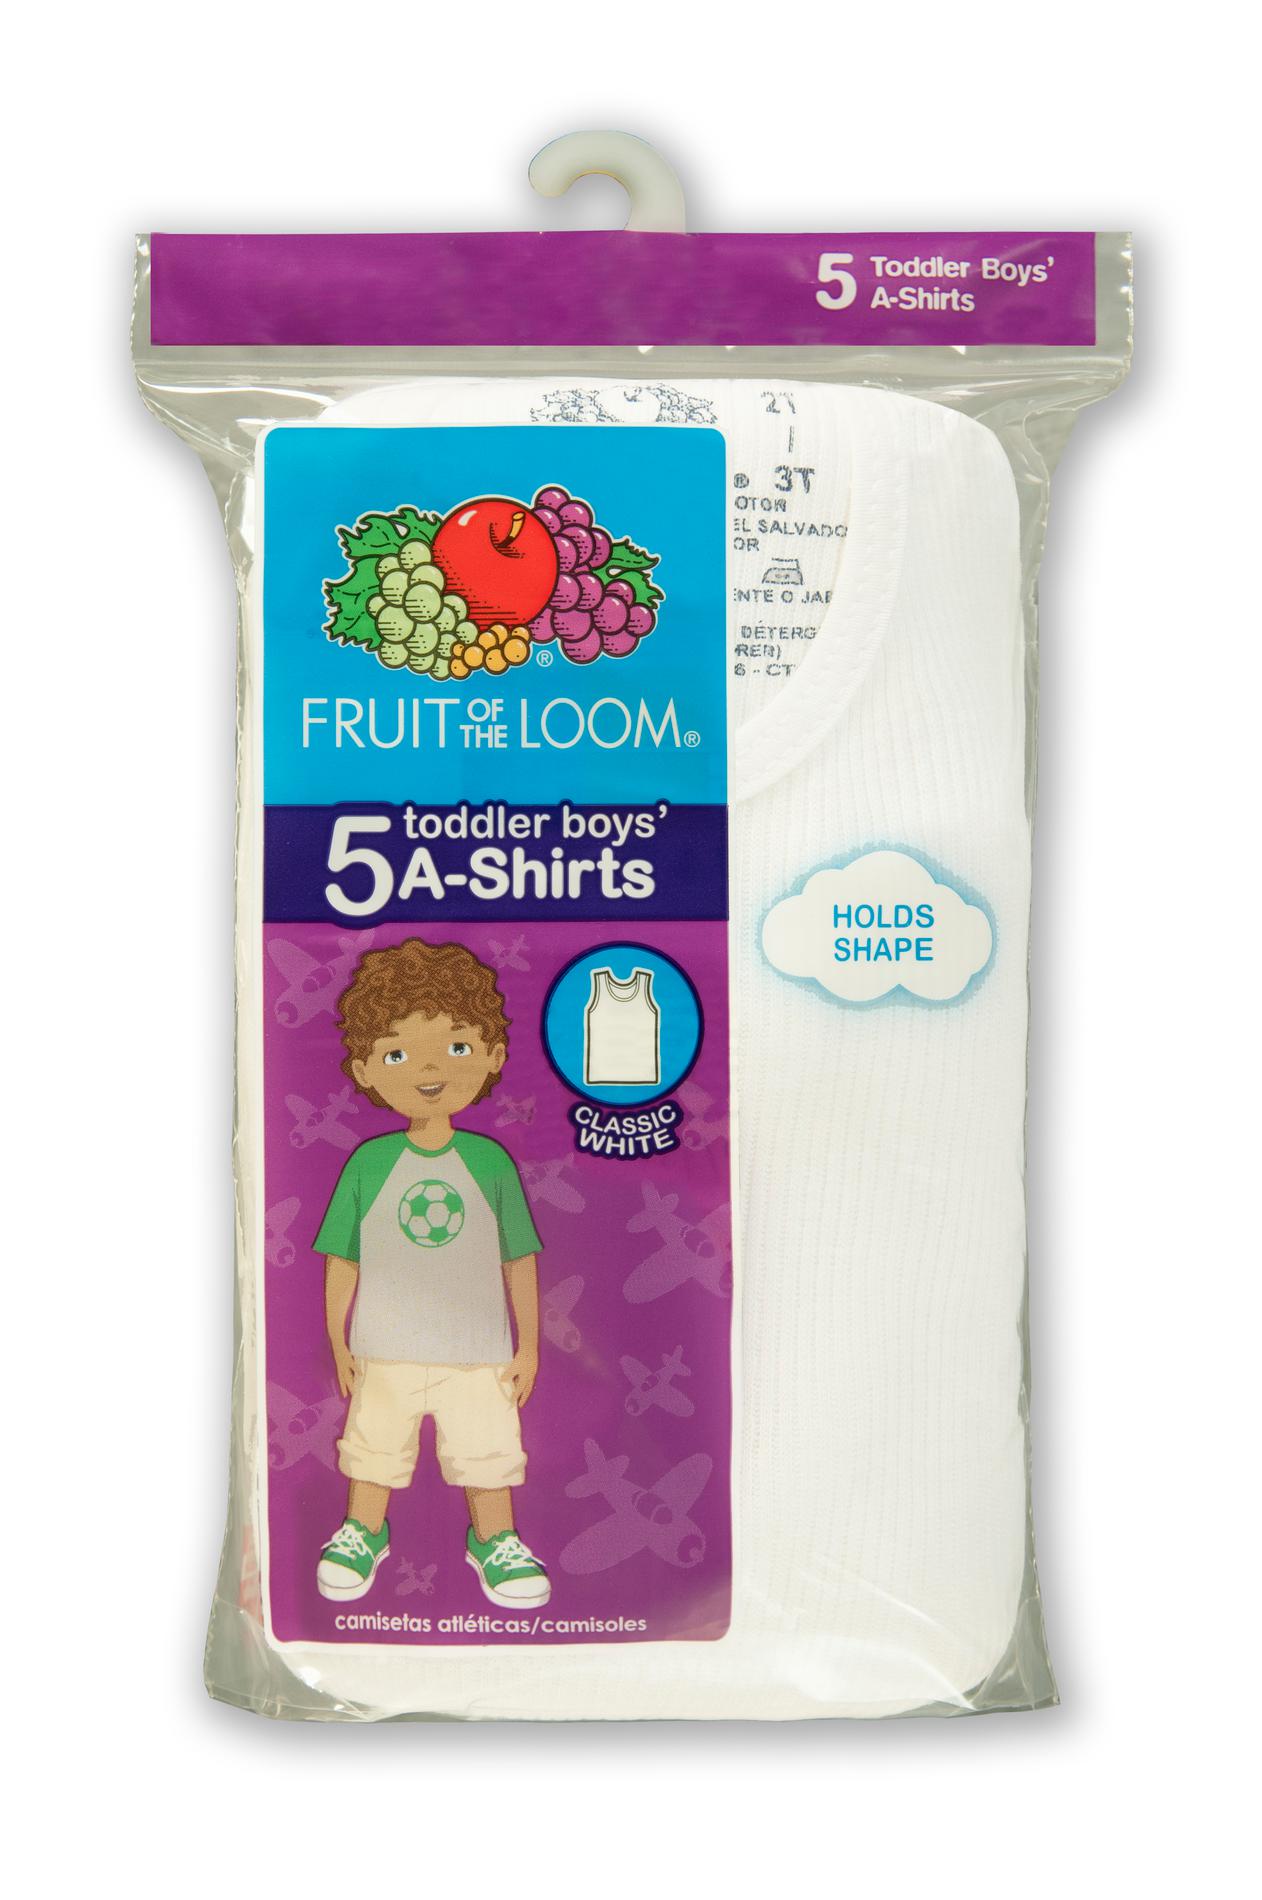 Fruit of the Loom Toddler Boy's 5-Pack Cotton Undershirts - A-Shirts